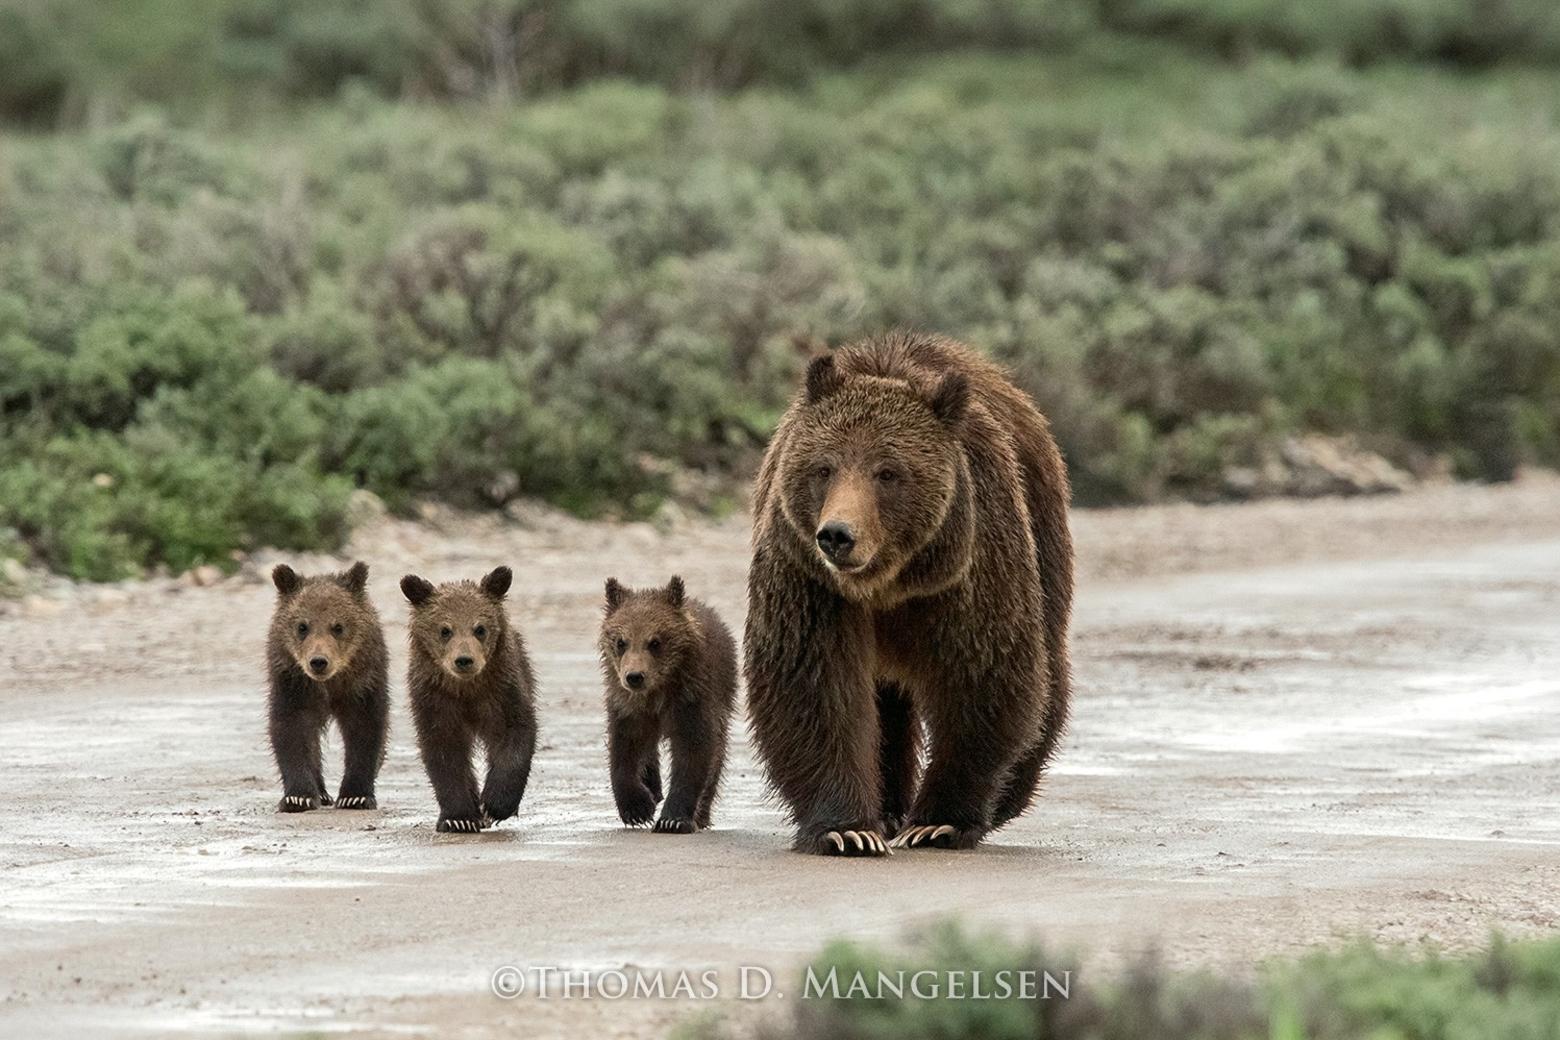 Grizzly 399 and her first set of triplets. Nature tourism is a multi-billion dollar industry in Greater Yellowstone and the Northern Rockies and one of the biggest drivers is wildlife watching. Two of the top attractions are grizzly bears and wolves in Yellowstone and Grand Teton. However, those two national parks are not large enough, by themselves, to sustain wildlife that migrates and has large home ranges.  The health of public wildlife depends on the ecological health of private lands surrounding public lands. "Teton Rush Hour" photo courtesy Thomas Mangelsen. To see more of his collectible photography go to mangelsen.com